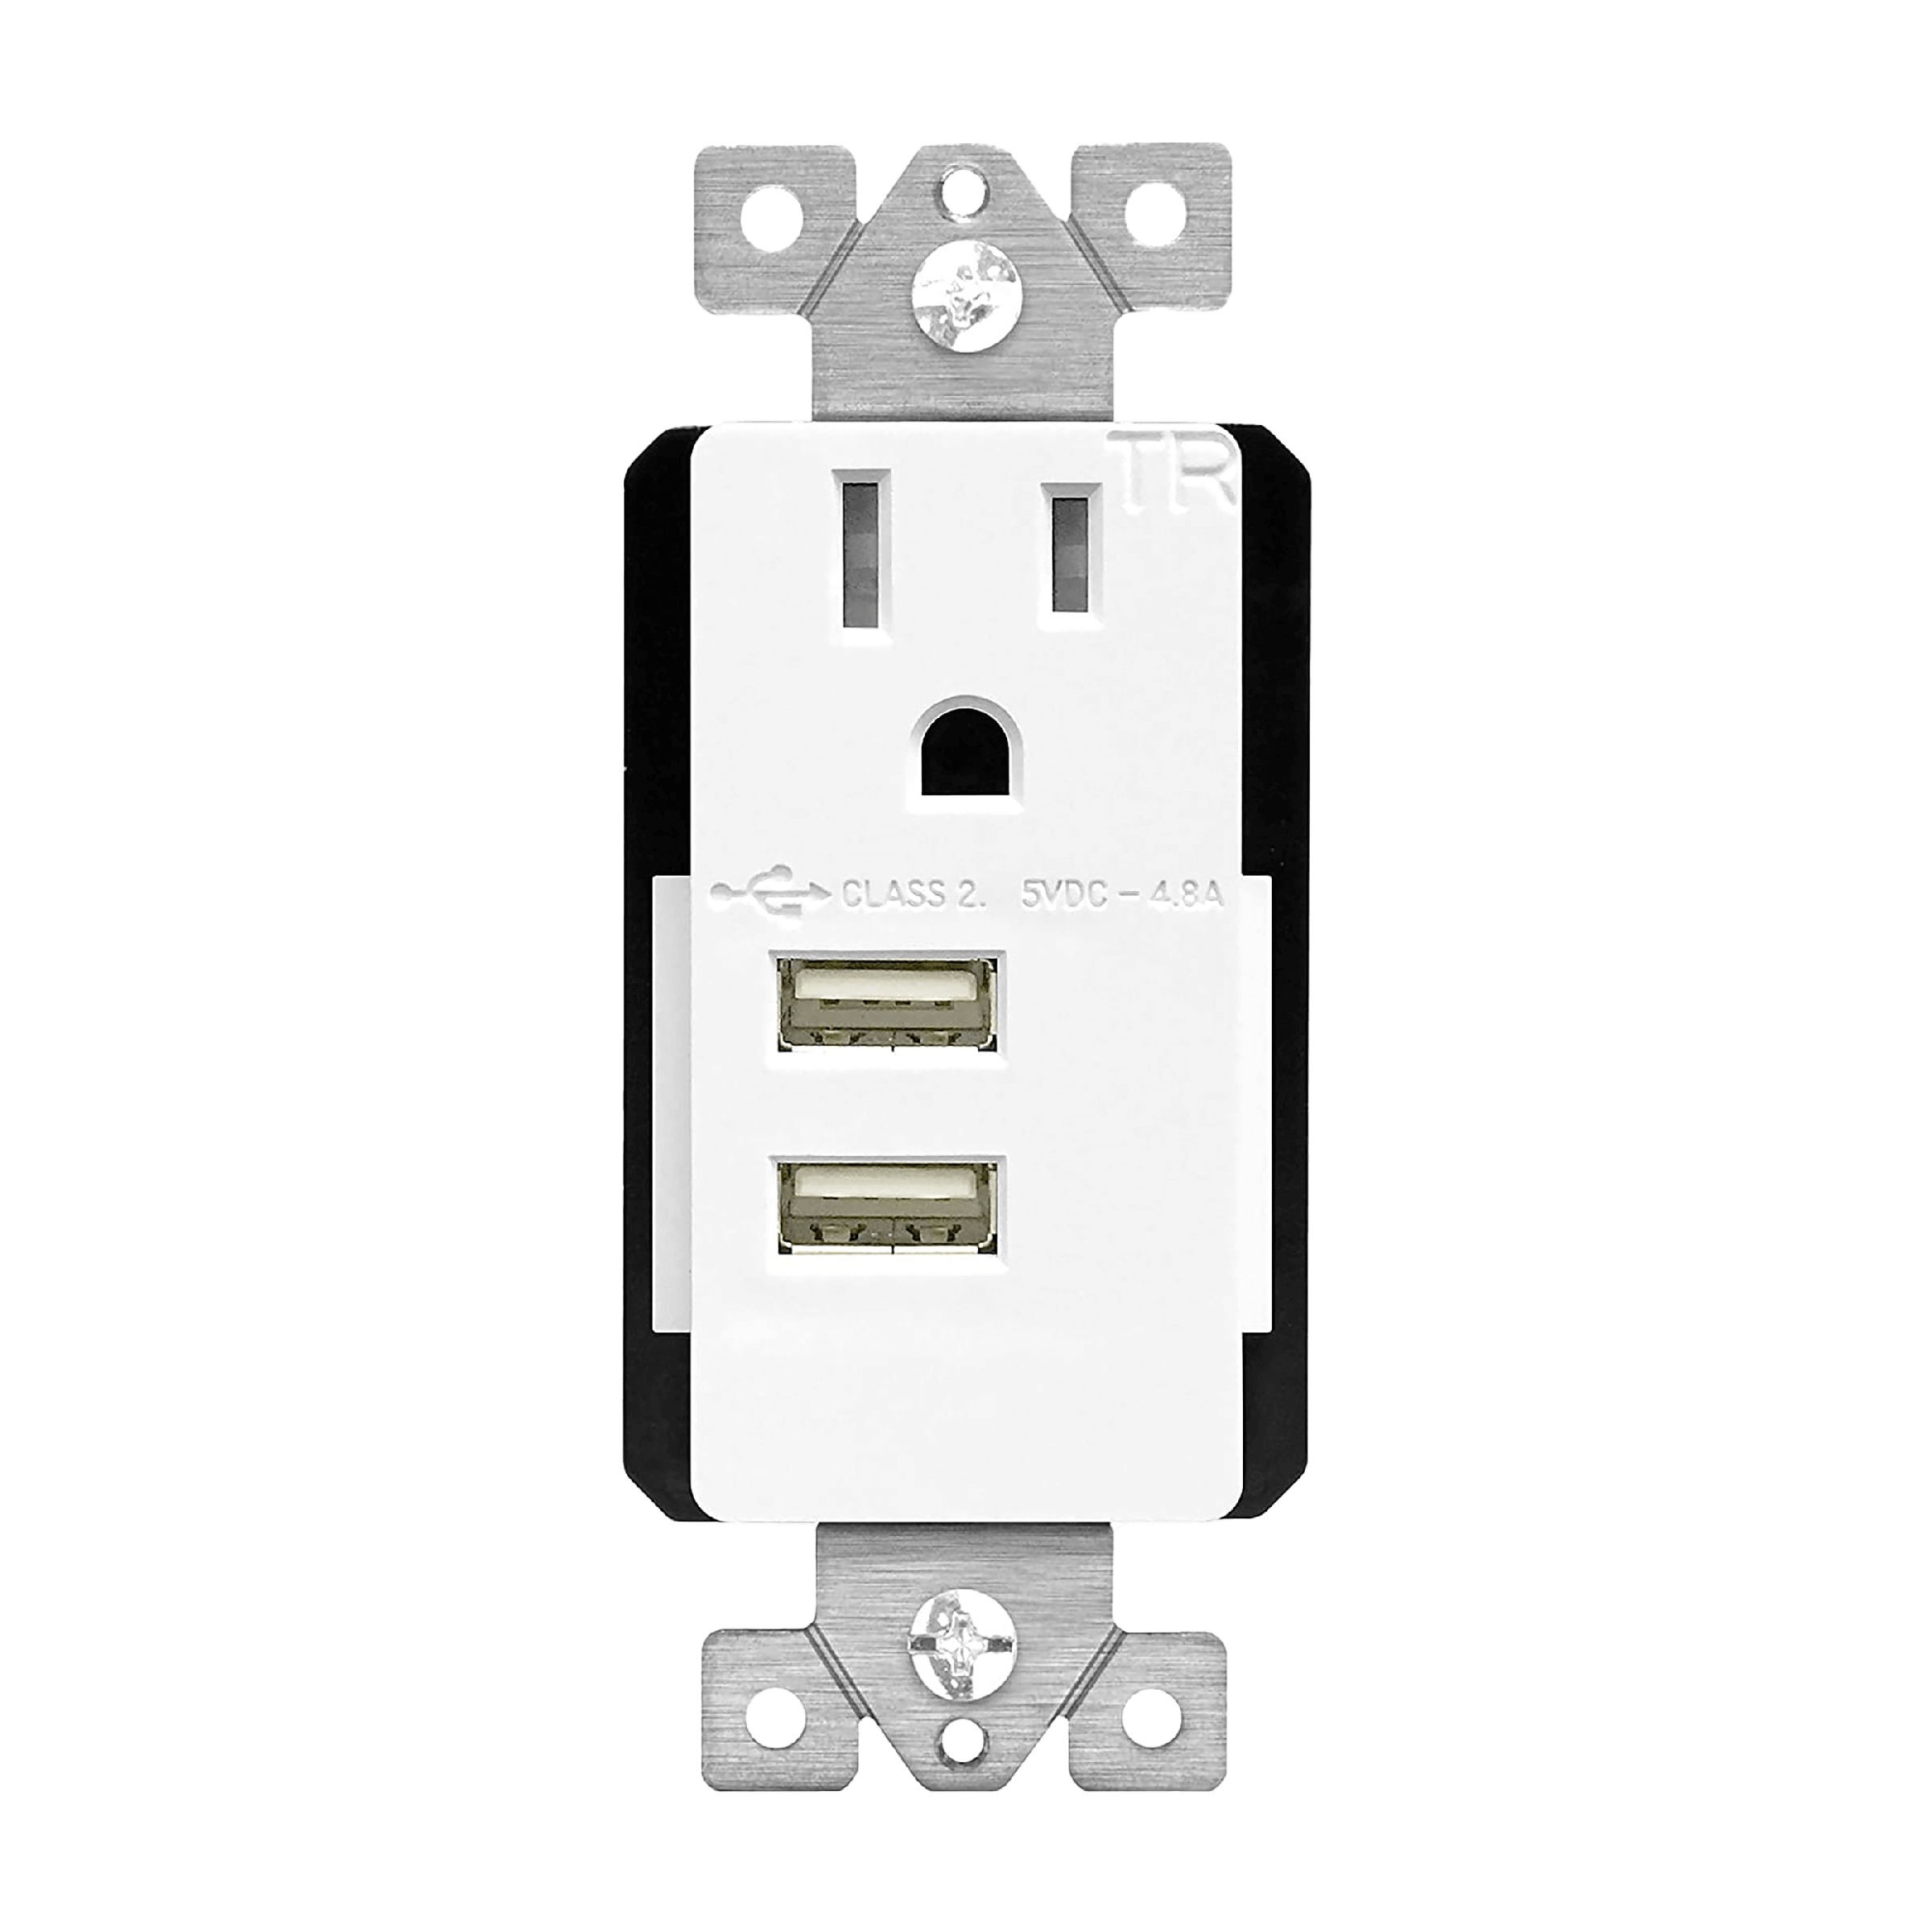 4.8A Dual USB-A Charging Outlet with Interchangeable Module, 15A/125V